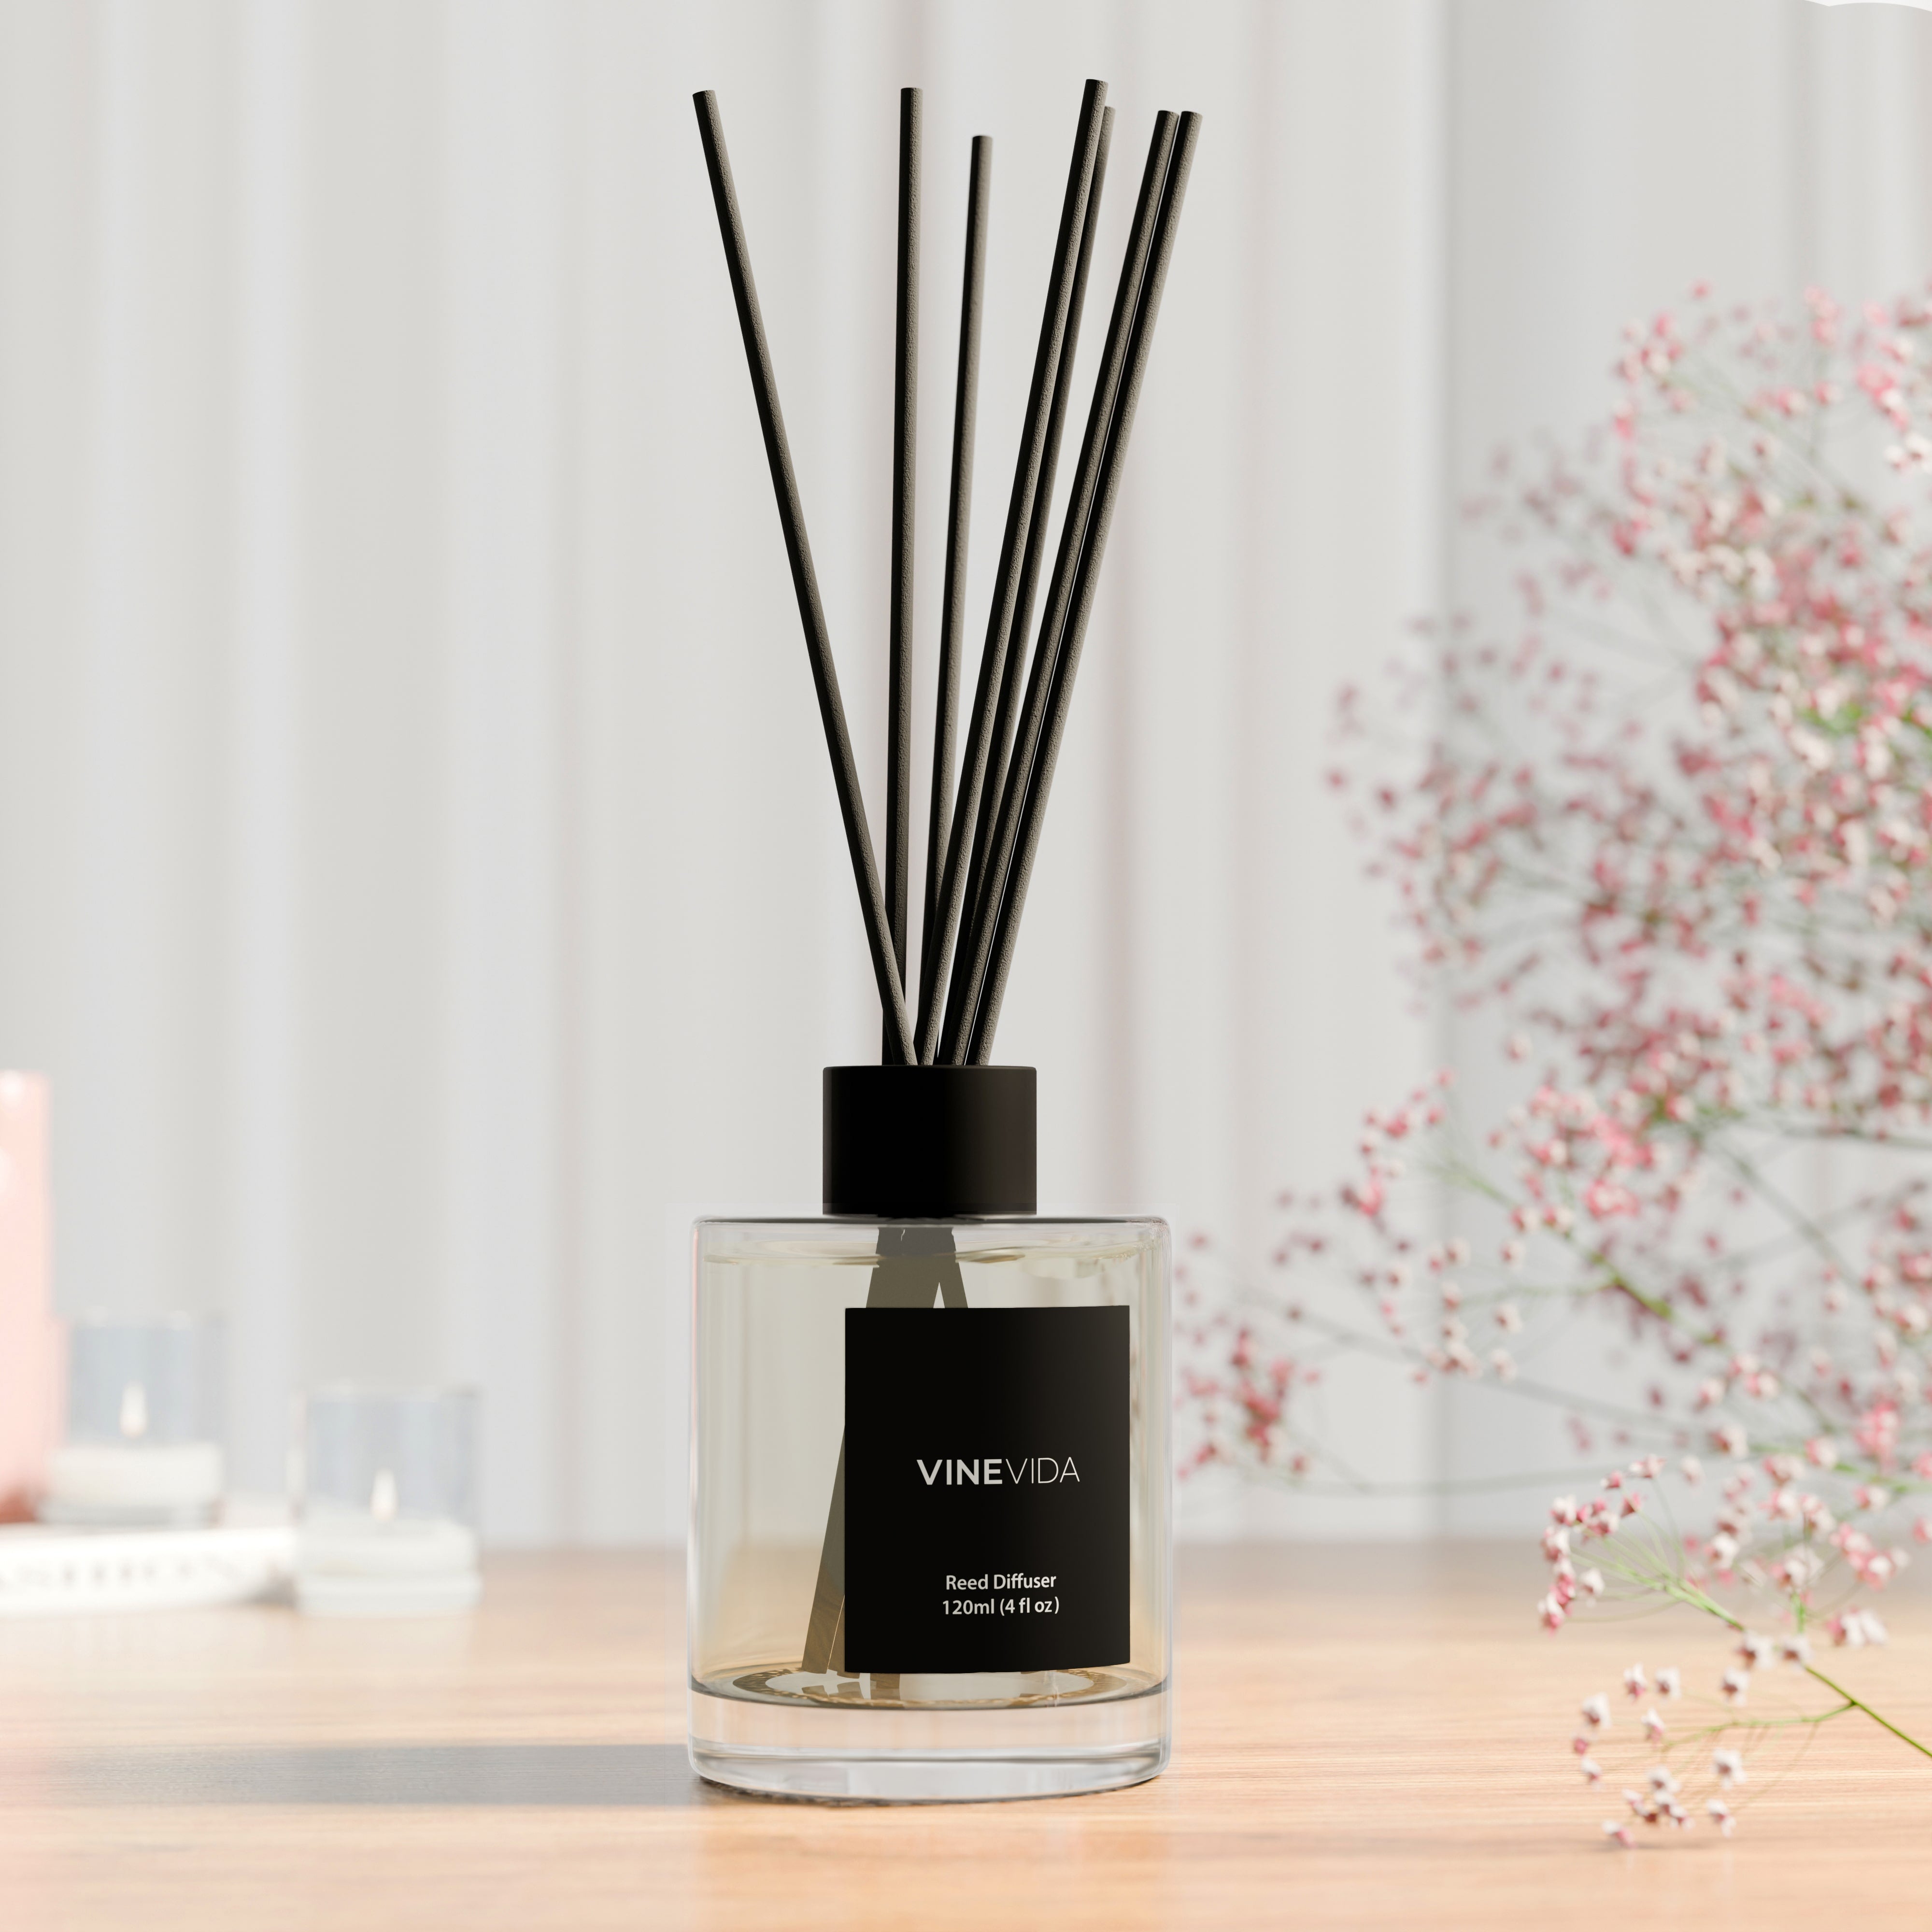 NO. 3600 Reed Diffuser - Inspired by: Aventus by Creed